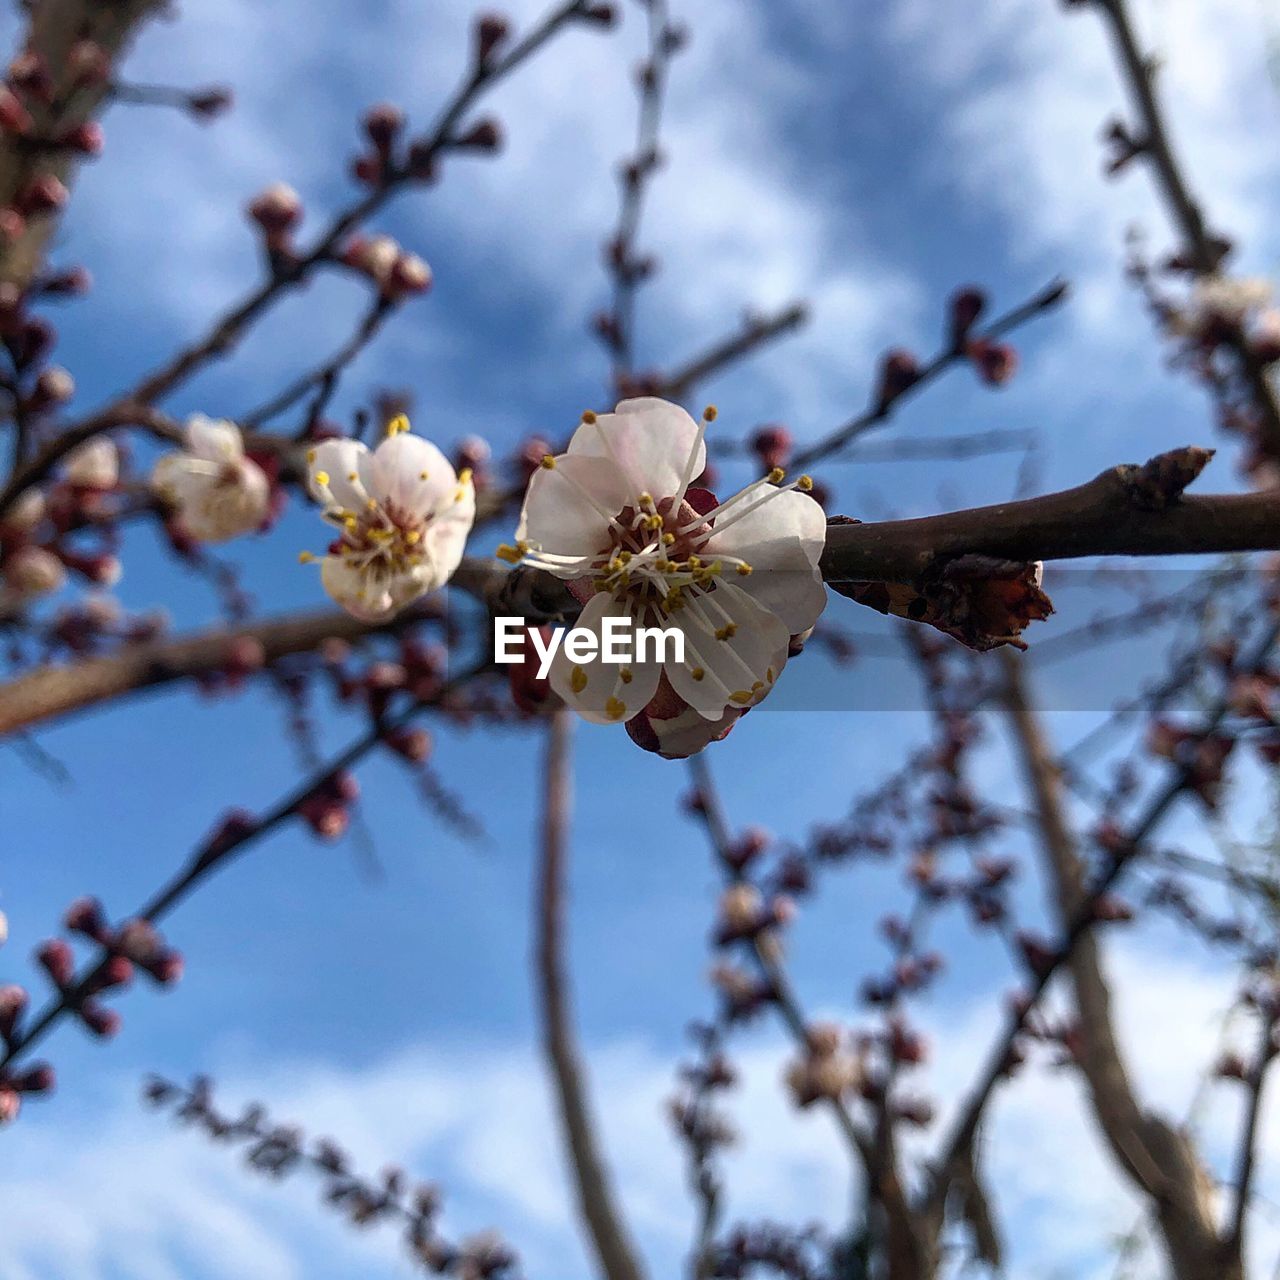 CLOSE-UP OF CHERRY BLOSSOM ON BRANCH